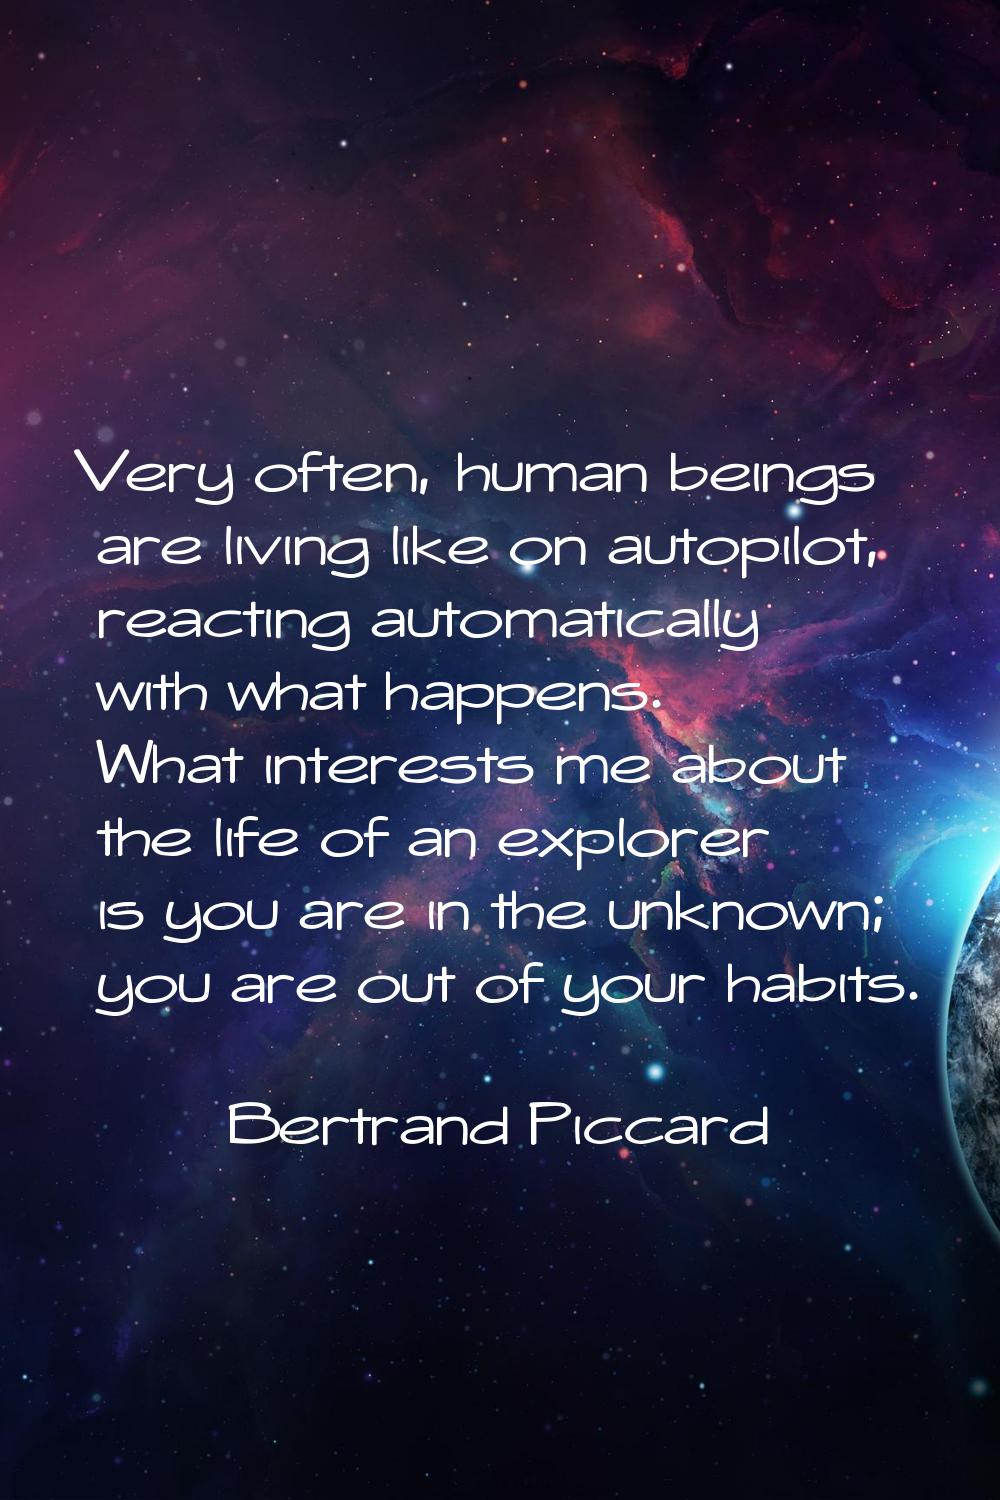 Very often, human beings are living like on autopilot, reacting automatically with what happens. Wh